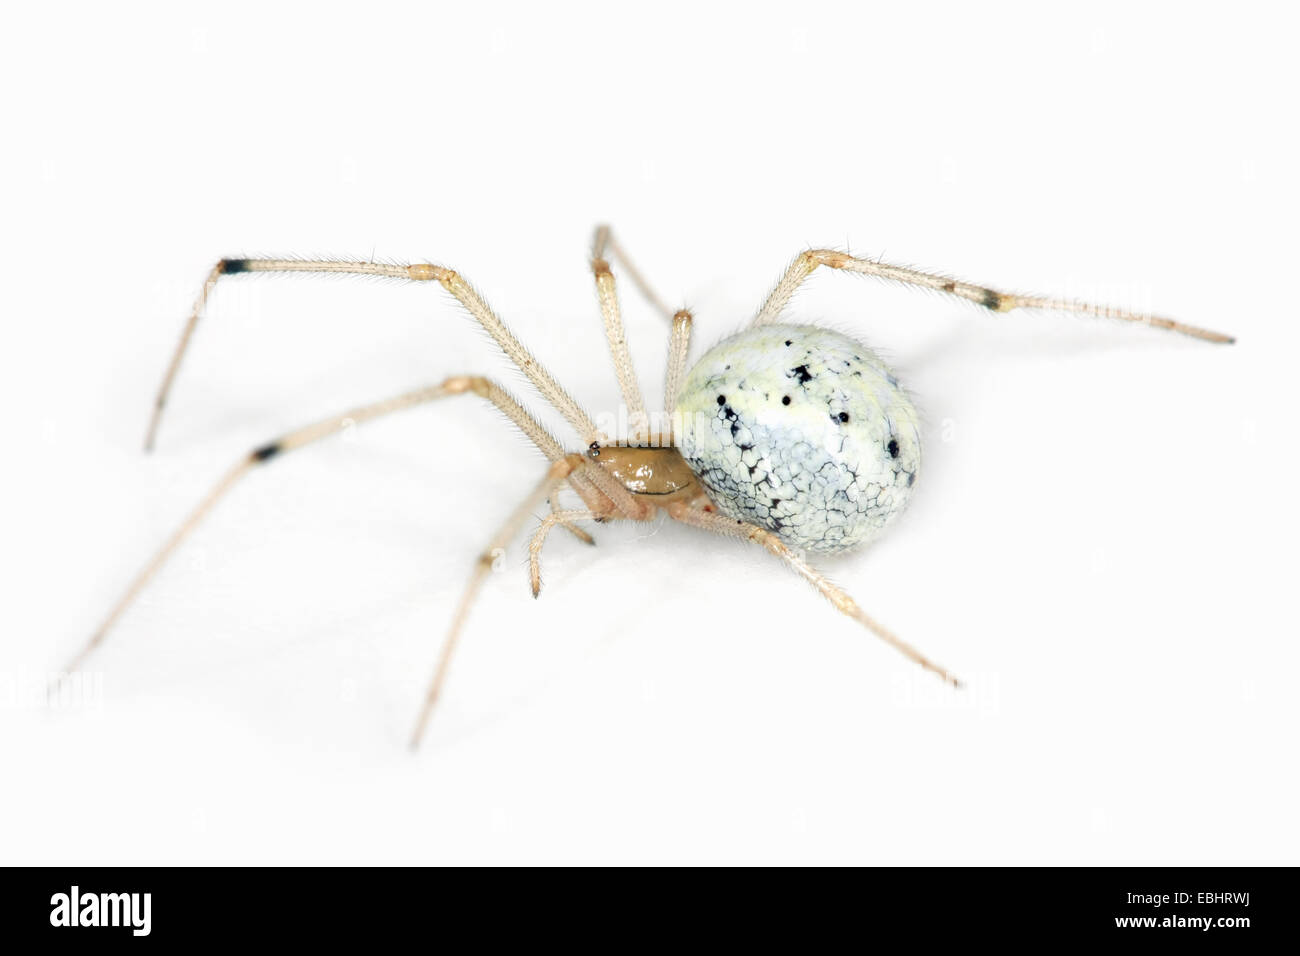 A female Candystripe (or Polymorphic) spider (Enoplognatha ovata) on a white background, part of the family Theridiidae - Cobweb weavers. Stock Photo